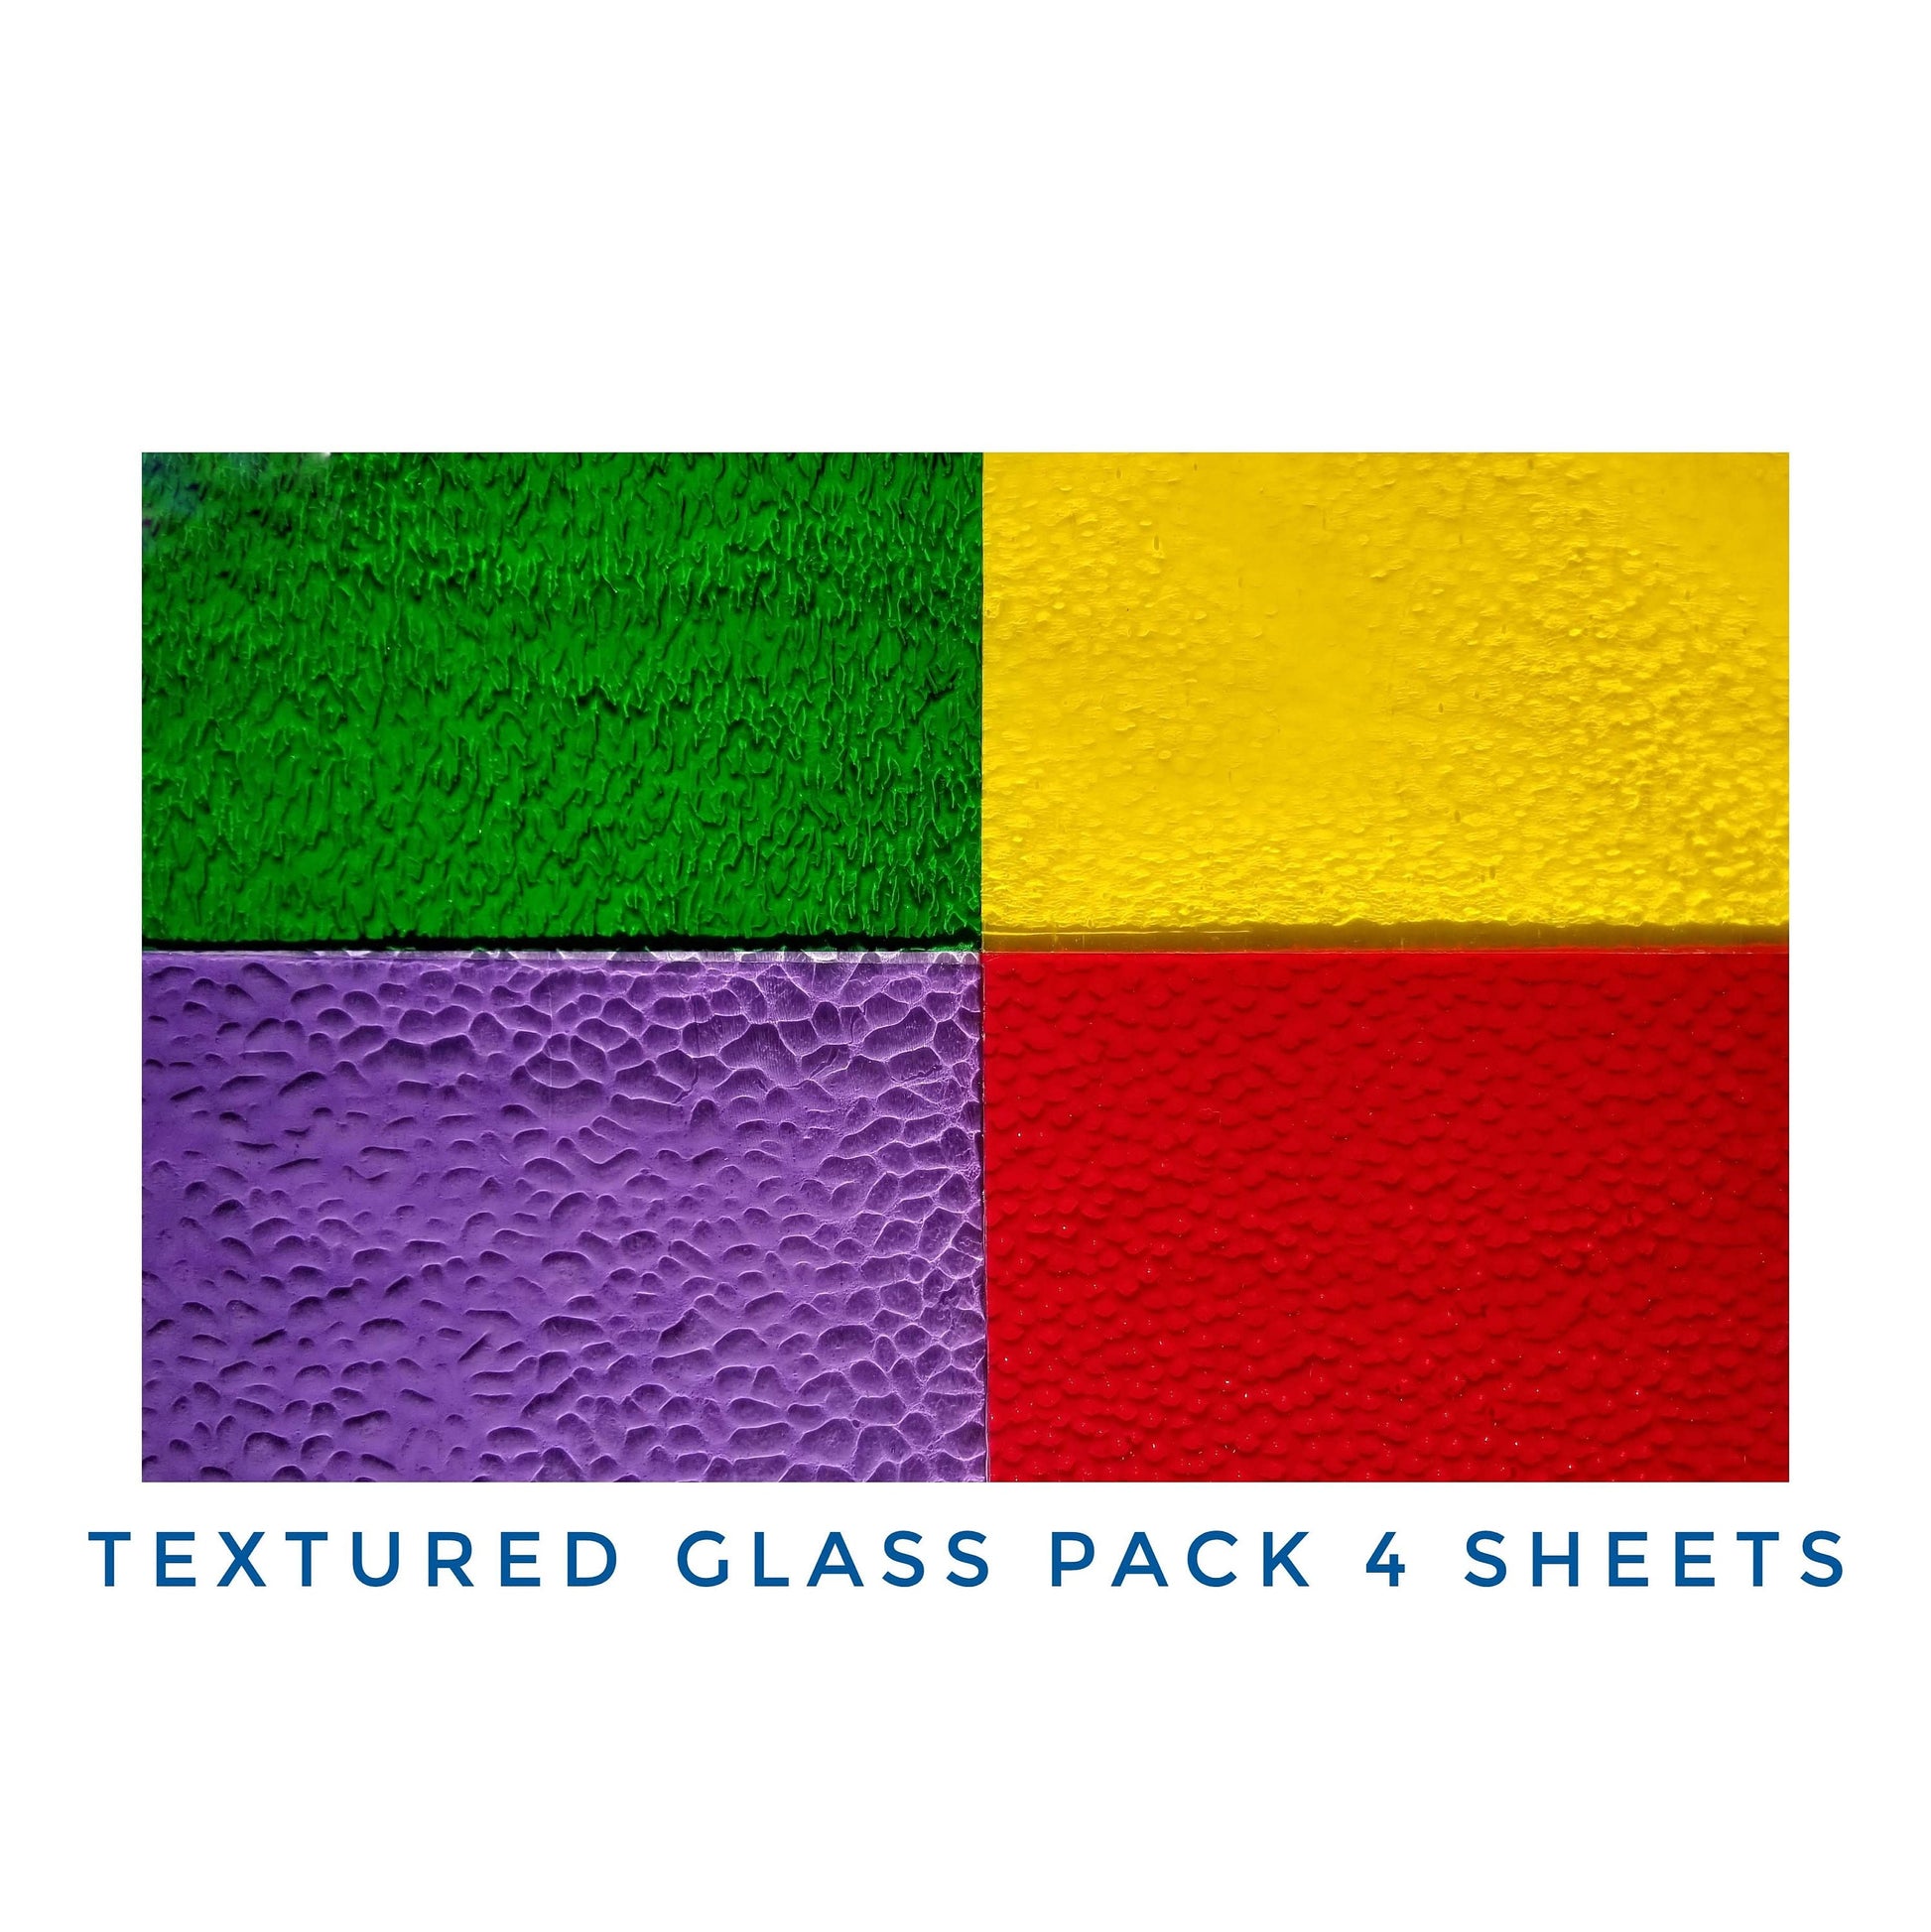 Stained Glass Sheets, 4 Color Pack of Soft Textures. Diy, easy to cut. Wissmach Cathedral, See Through. 8"×8"